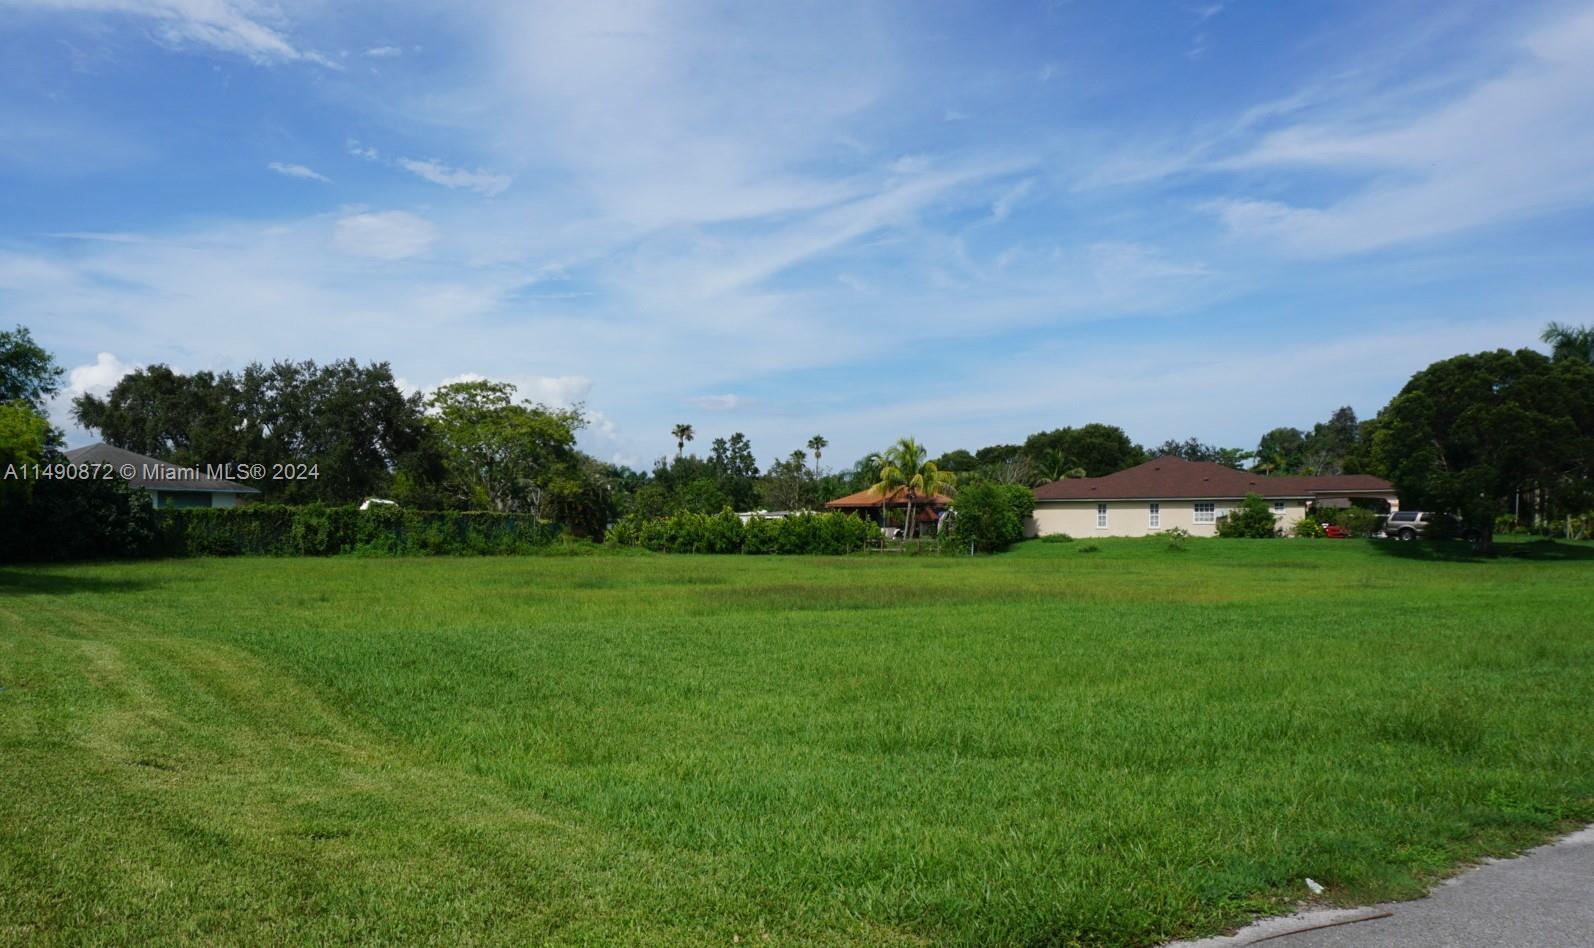 a view of yard with grass & street view